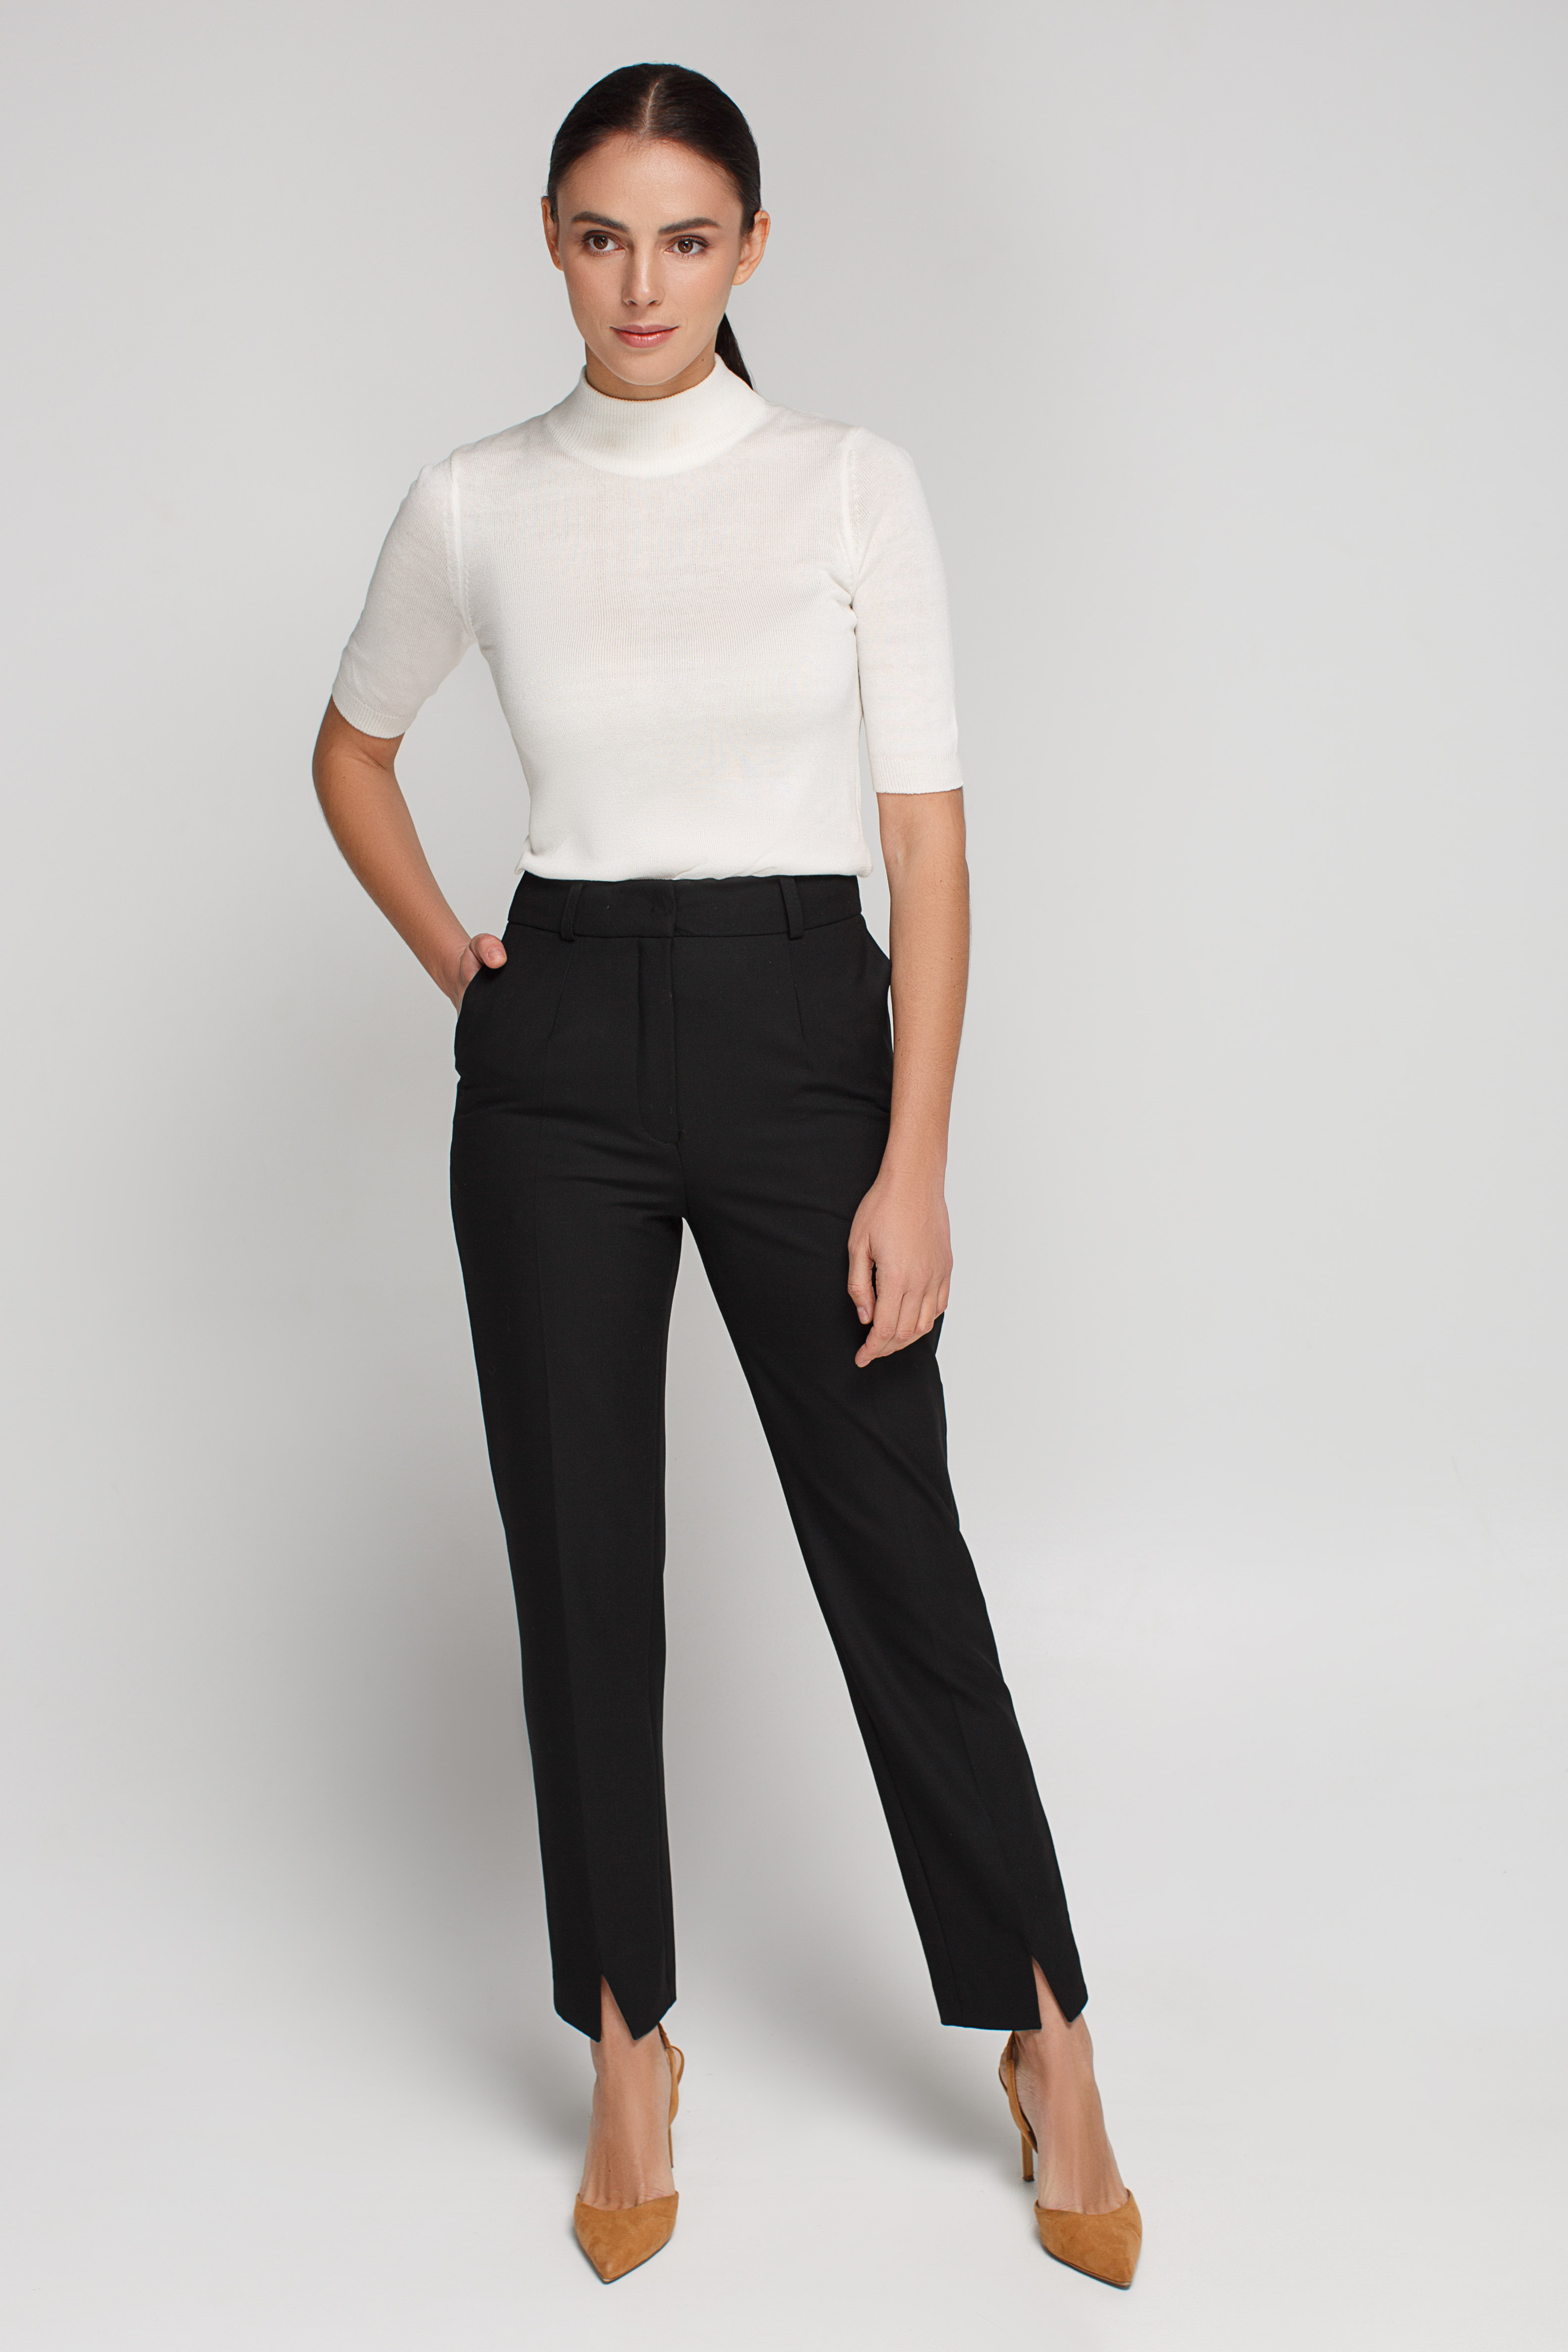 Black straight pants with front slits , photo 4